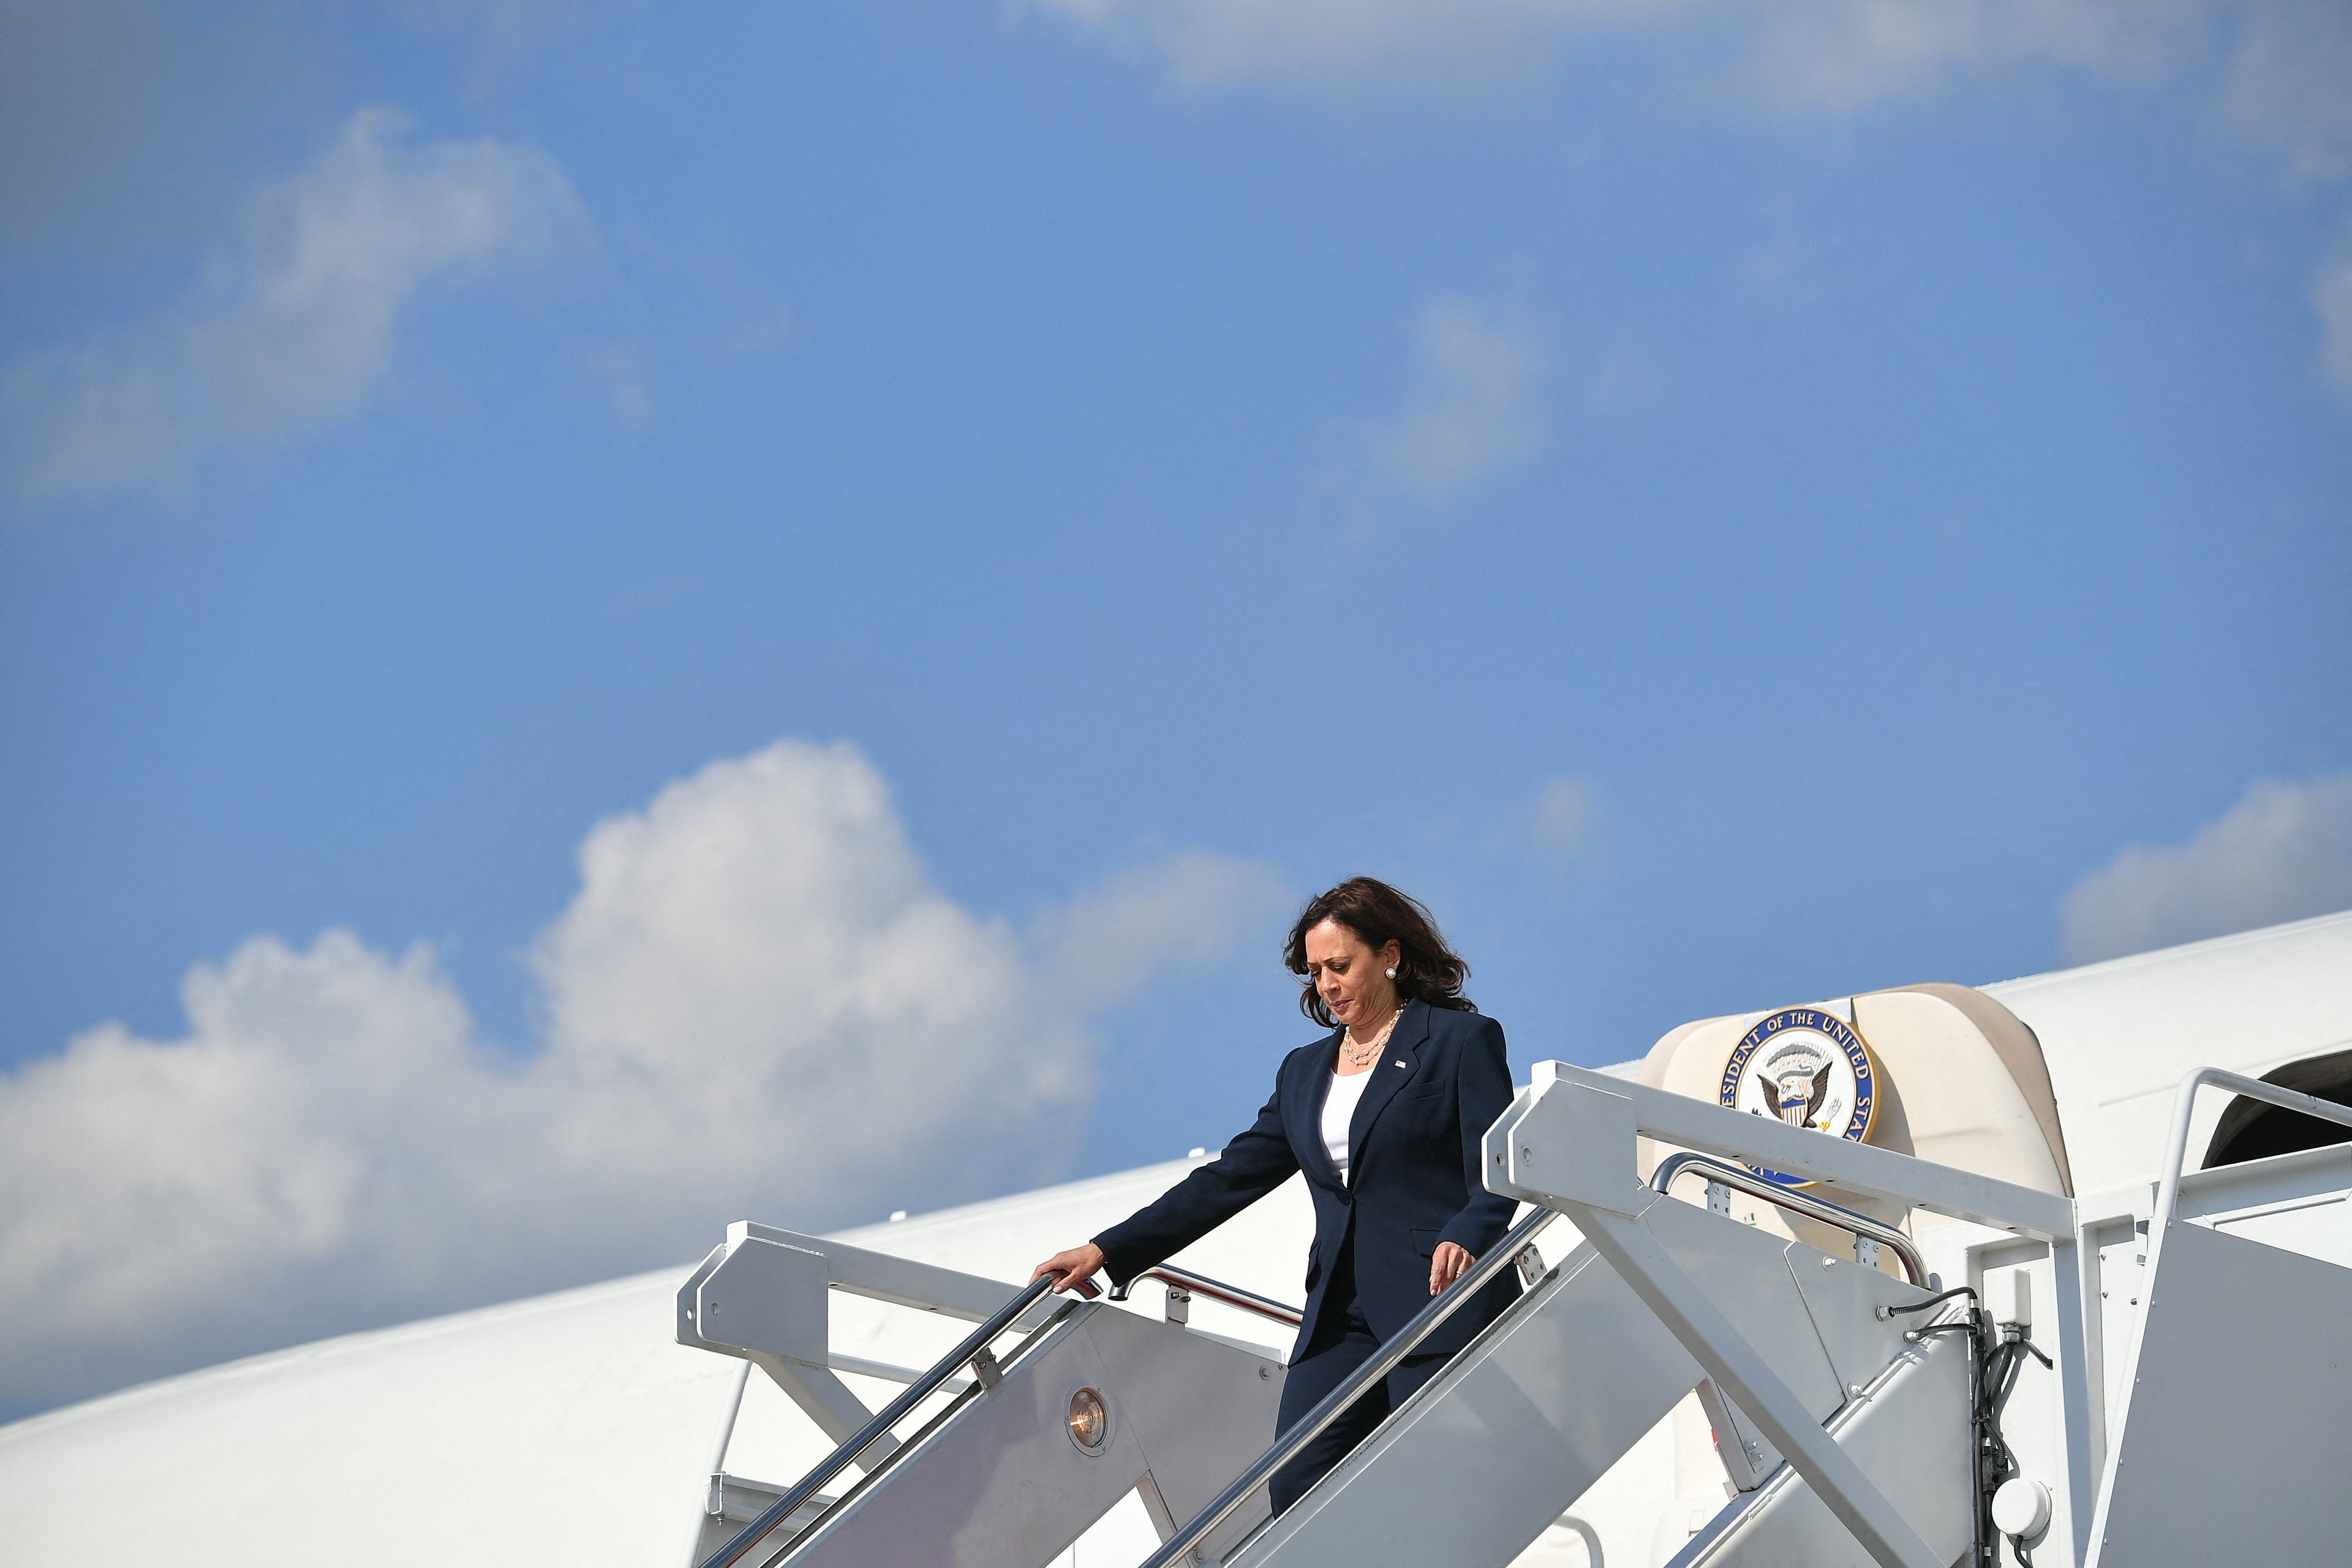 (FILES) US Vice President Kamala Harris deplanes upon arrival at Andrews Air Force Base in Maryland on June 14, 2021. Joe Biden on July 21, 2024 dropped out of the US presidential election and endorsed Vice President Kamala Harris as the Democratic Party's new nominee, in a stunning move that upends an already extraordinary 2024 race for the White House. Biden, 81, said he was acting in the "best interest of my party and the country" by bowing to weeks of pressure after a disastrous June debate against Donald Trump stoked worries about his age and mental fitness. (Photo by MANDEL NGAN / AFP)